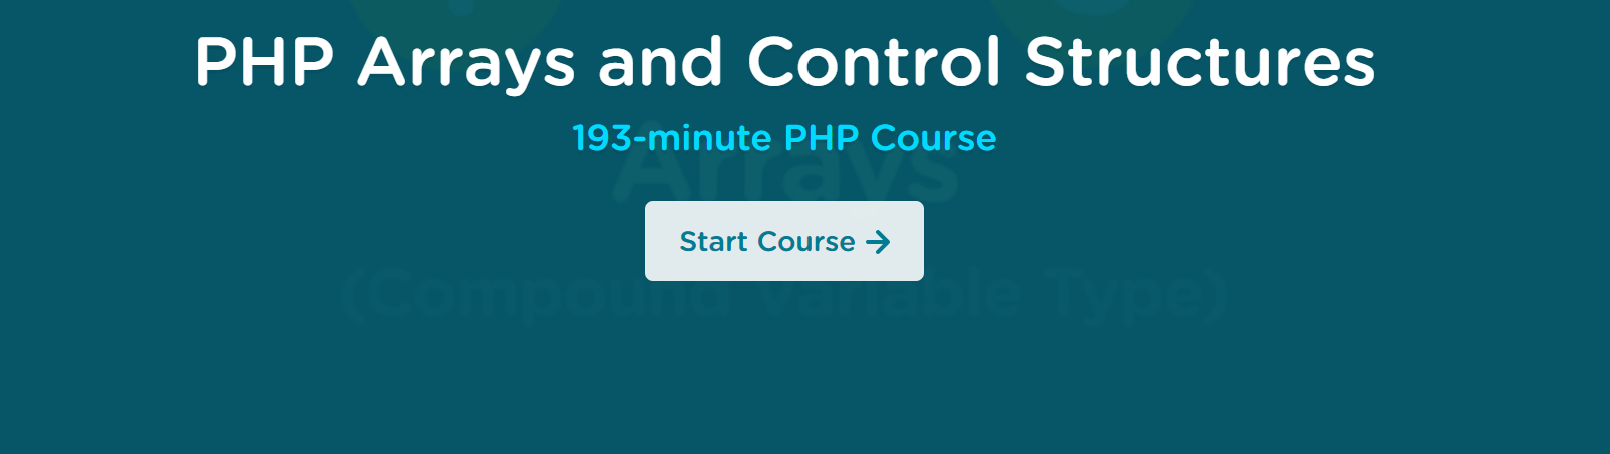 PHP Arrays and Control Structures Course